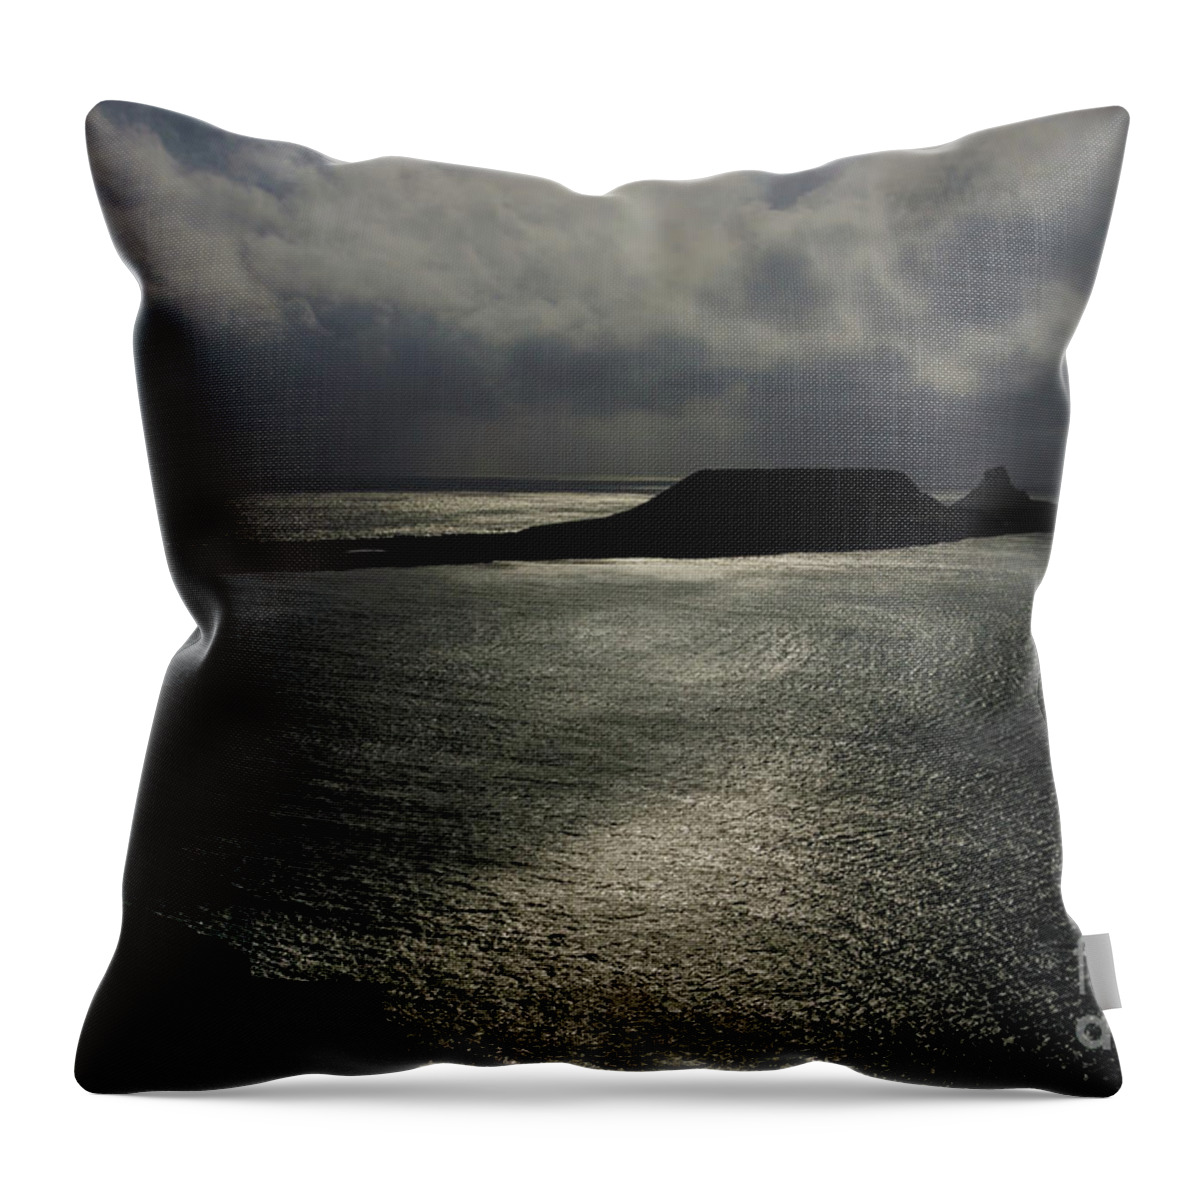 Worms Throw Pillow featuring the photograph Worms Head, Rhossili Bay 3 by Perry Rodriguez